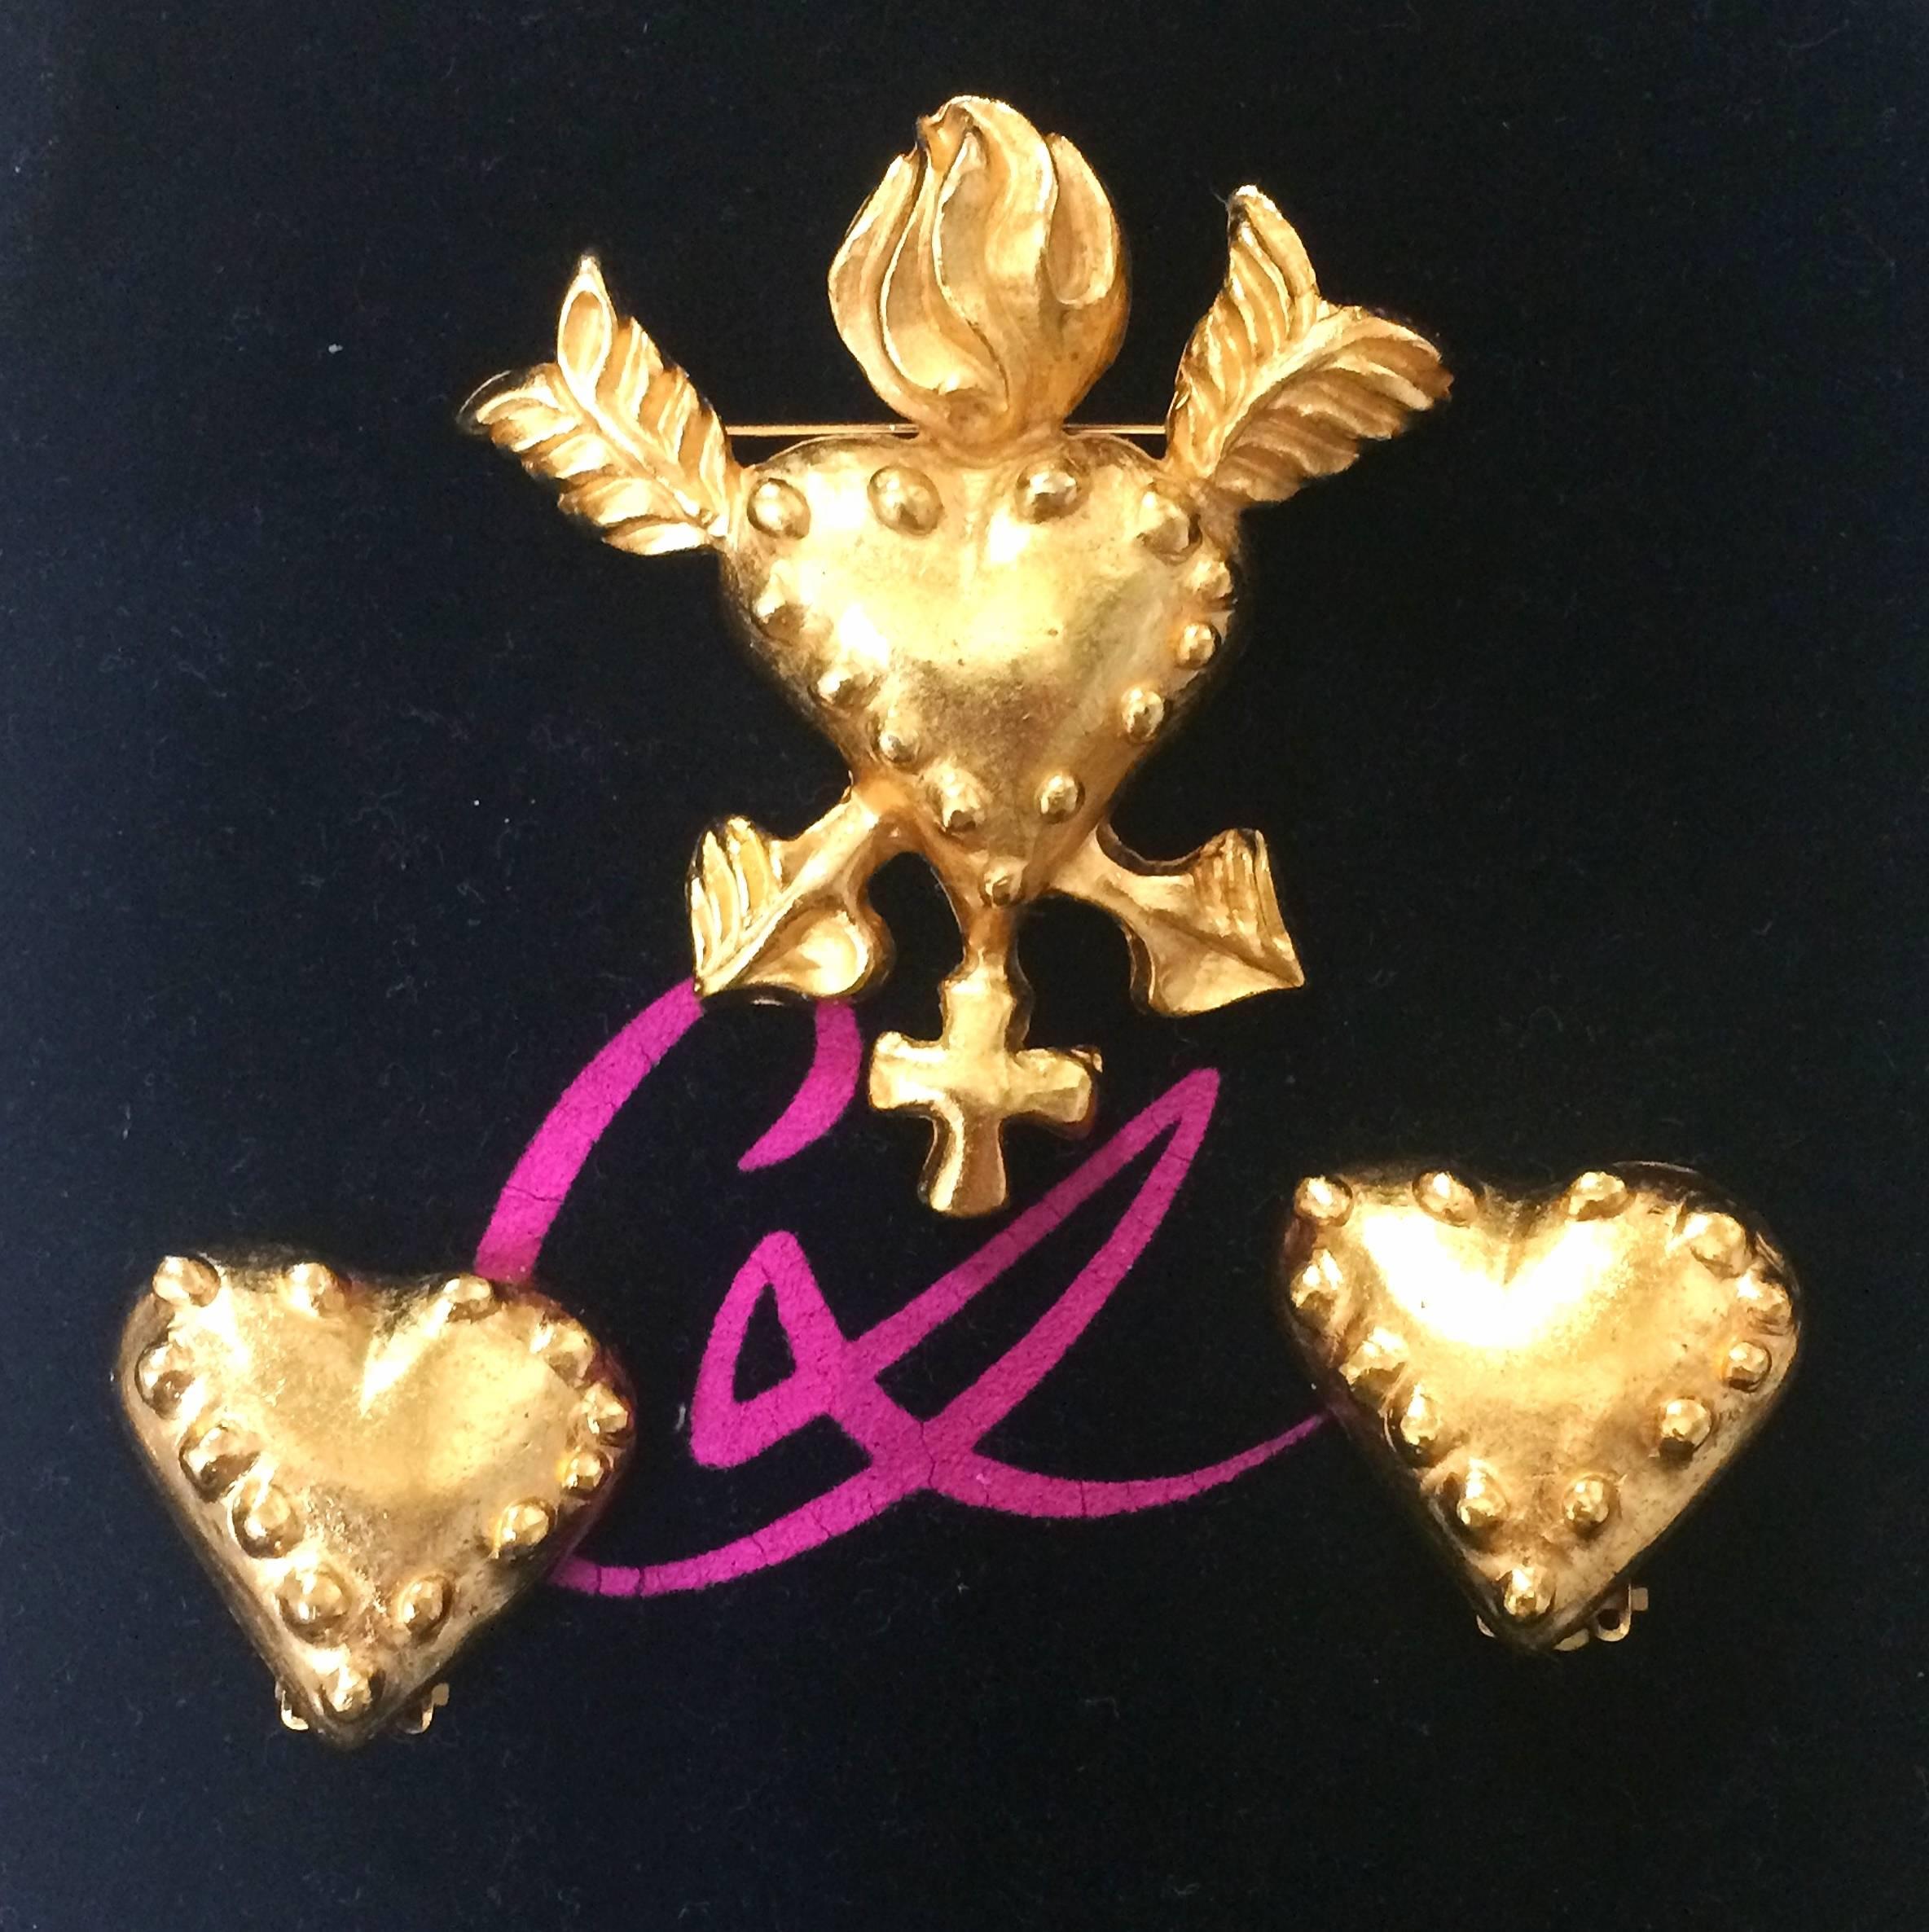 1990s. Vintage Christian Lacroix golden heart and arrow motif brooch, hat pin, jacket pin, and heart earrings set. Perfect gift jewelry.

Fun, Chic and Gorgeous jewelry piece set, brooch and matching earrings from Christian Lacroix.
Heart and